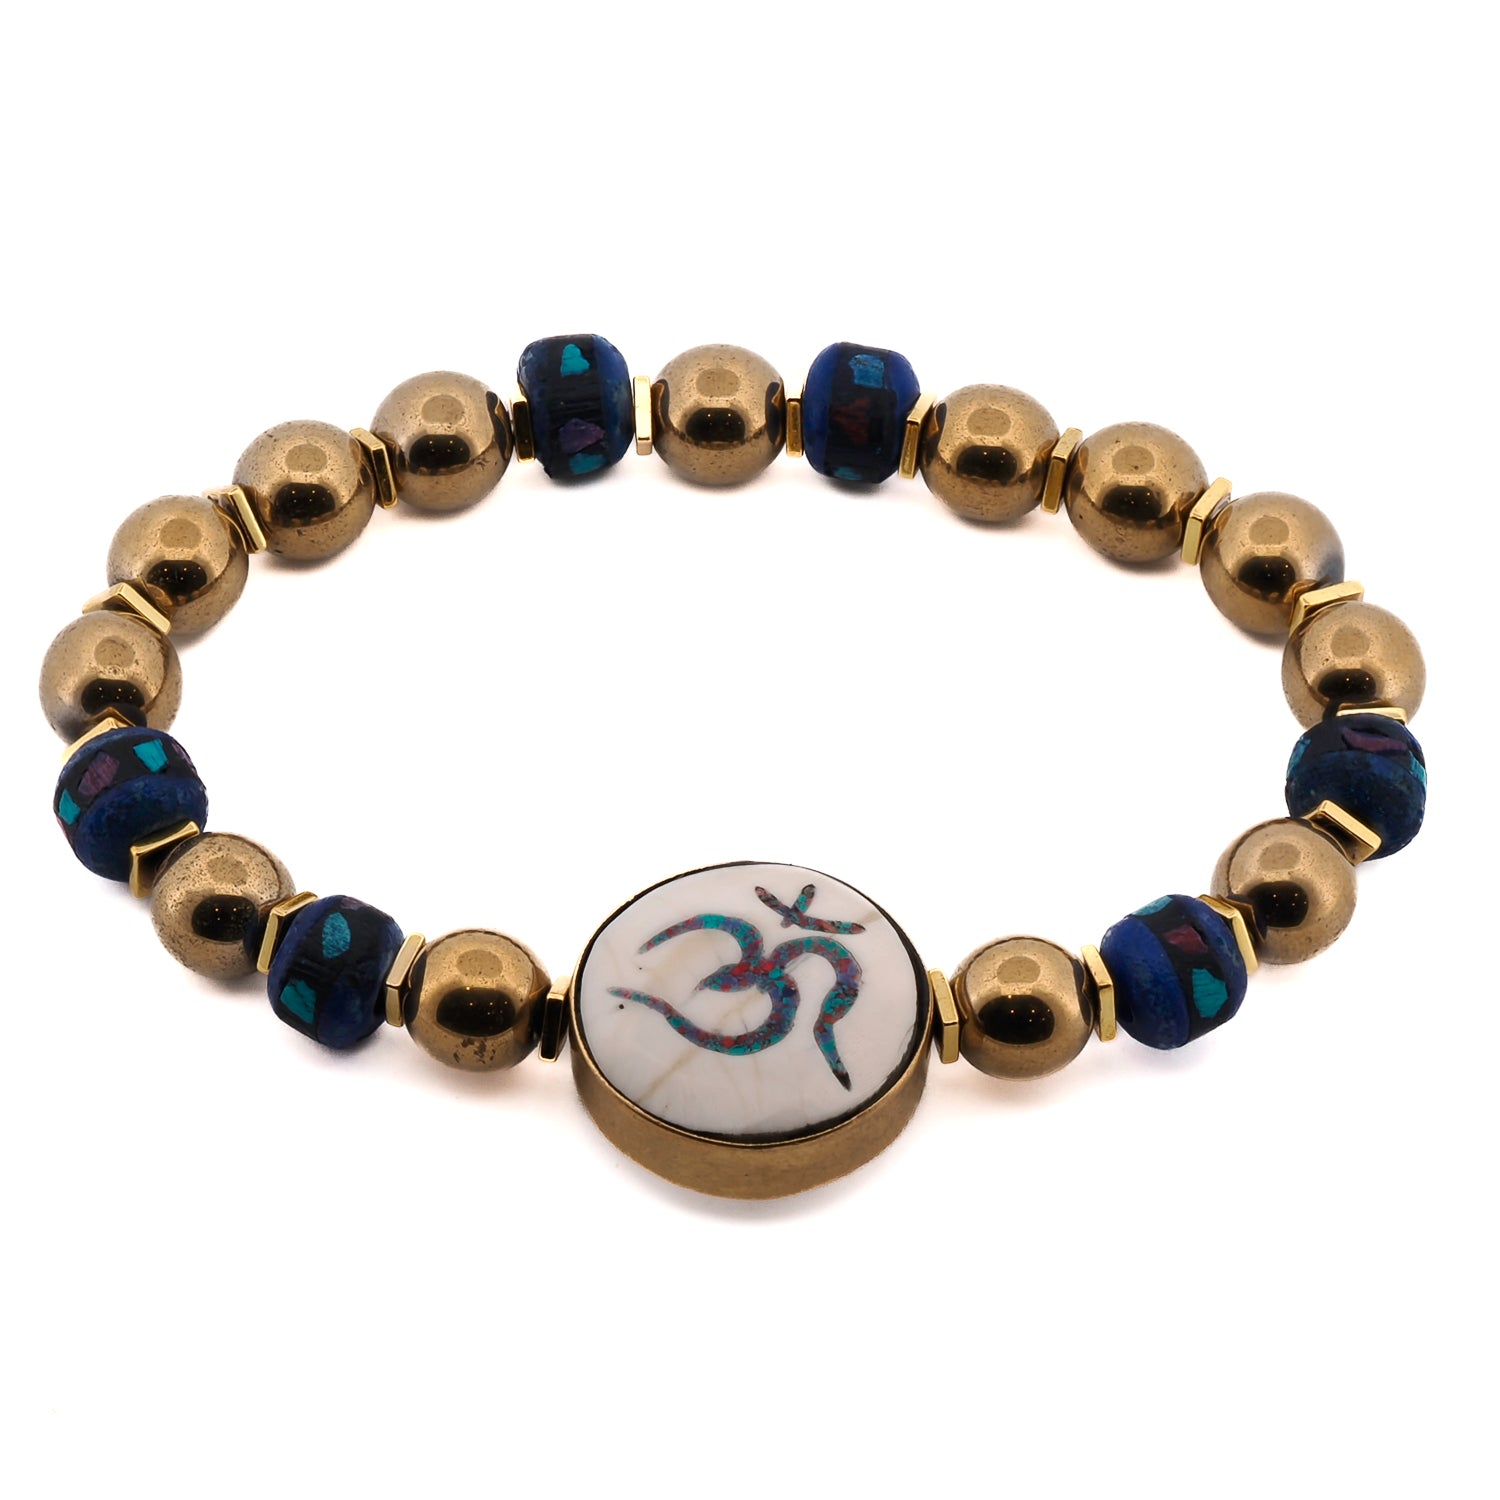 Handcrafted Nepal Om Bead Bracelet with Gold Hematite